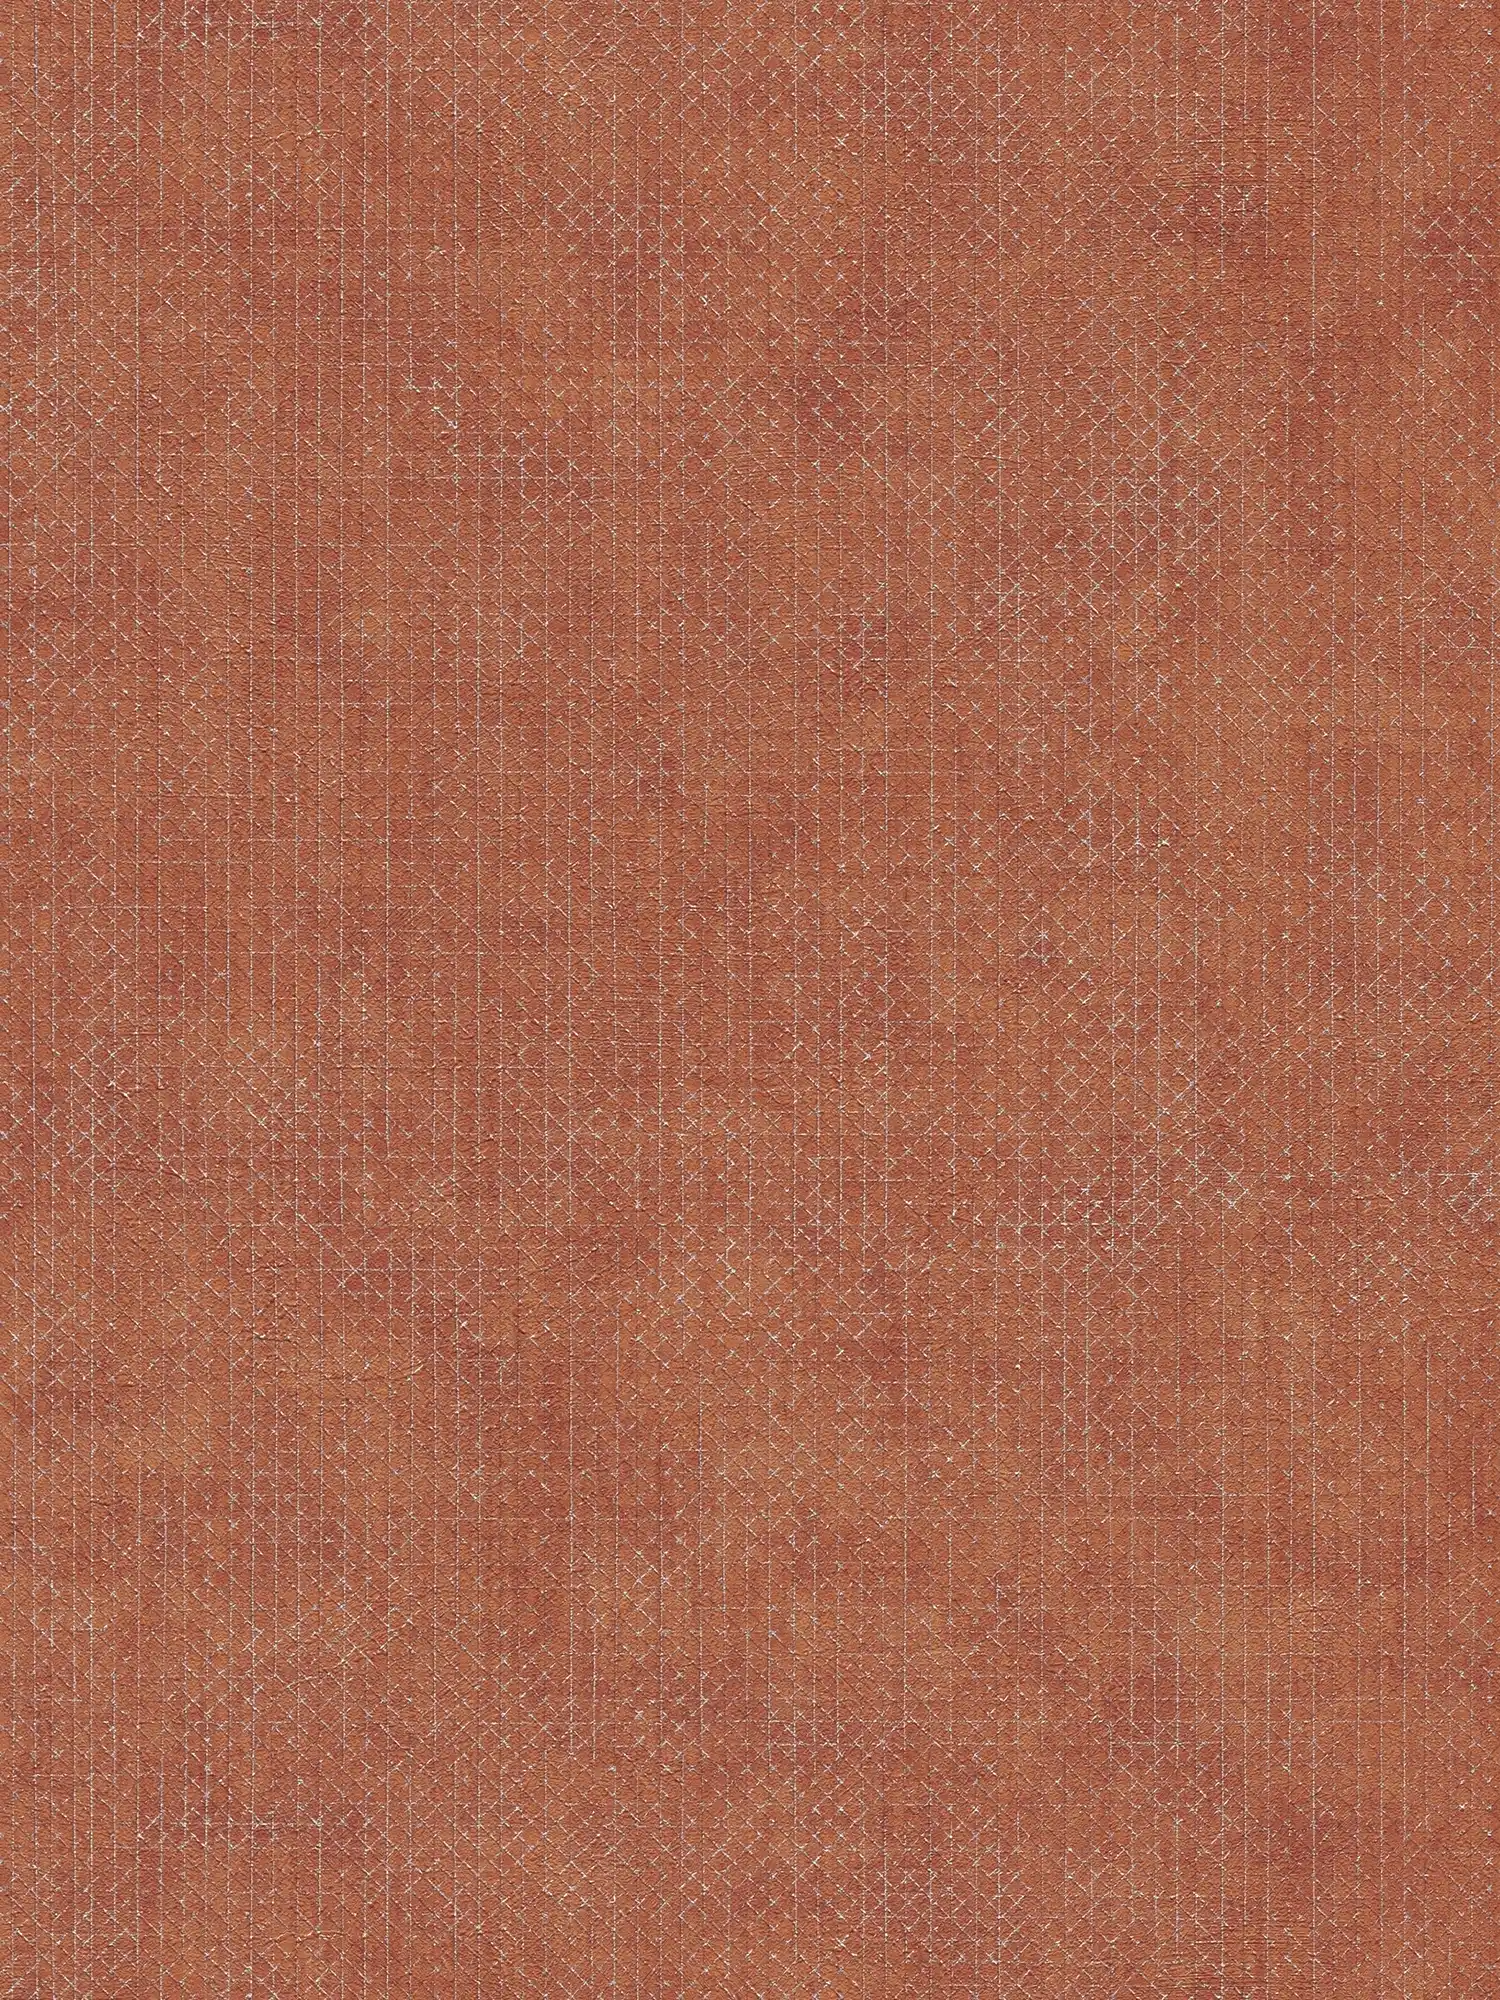 Brick red wallpaper with silver texture pattern - orange, red
